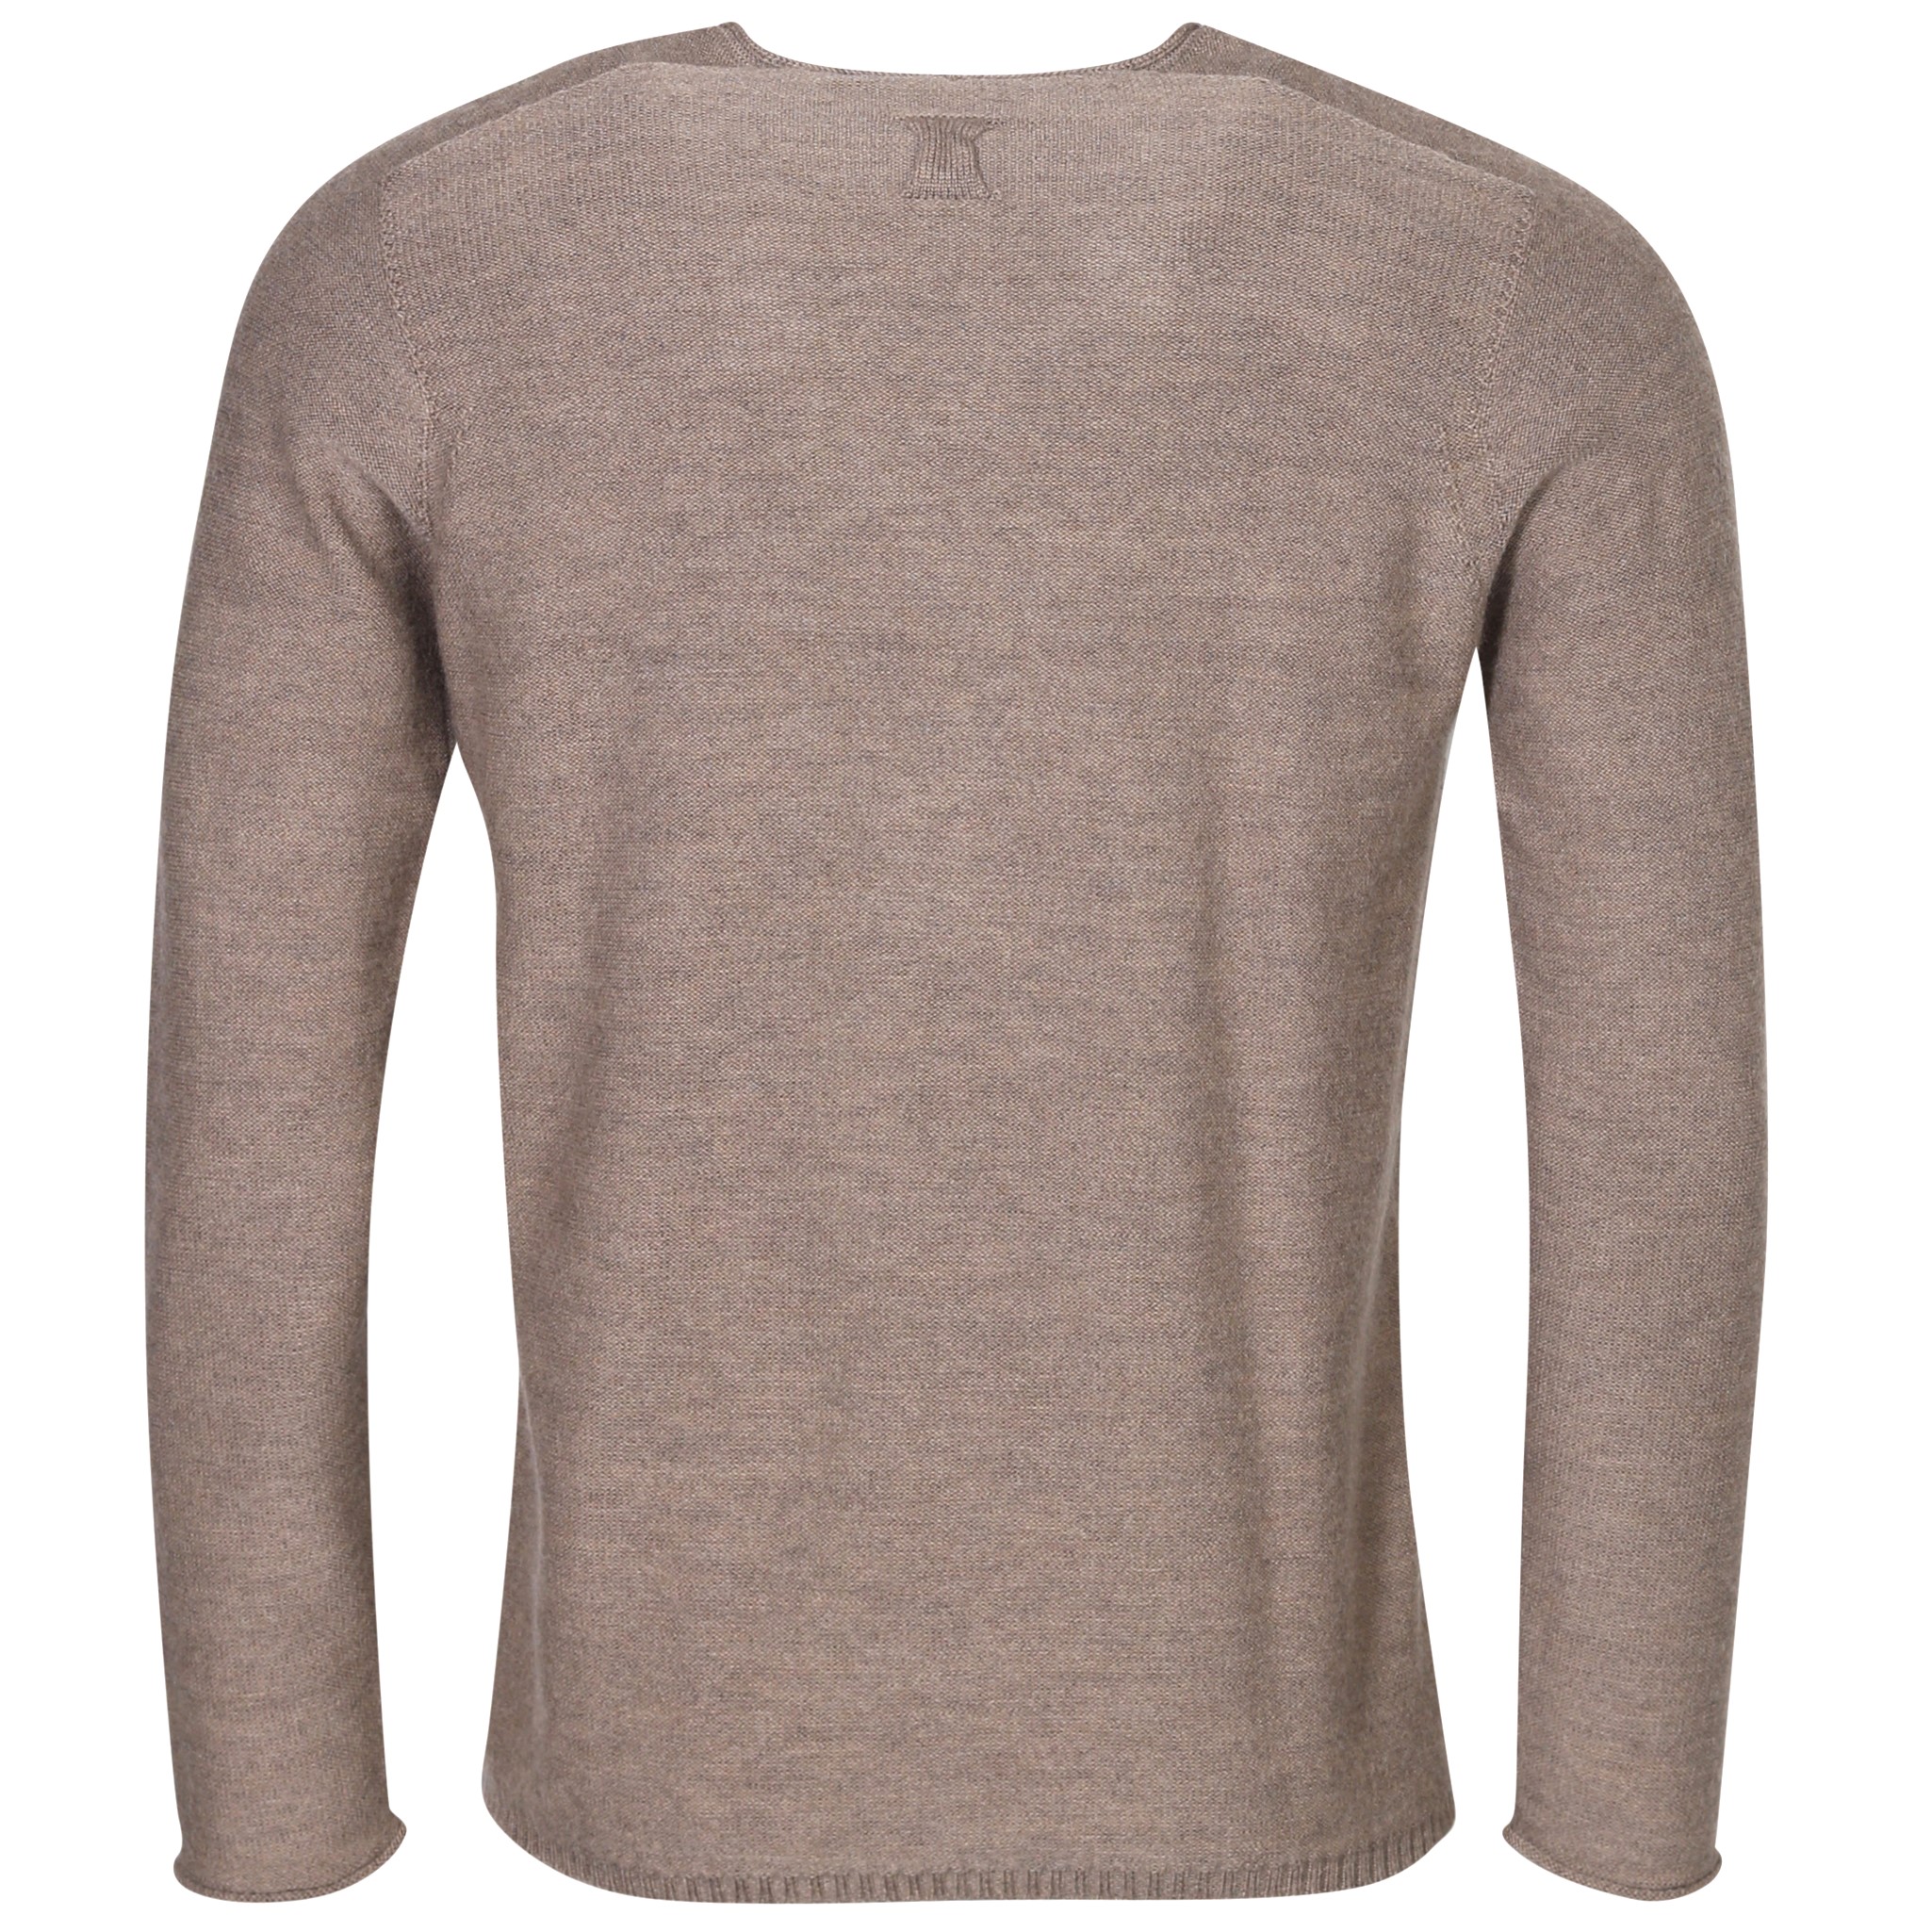 HANNES ROETHER Merino Knit Pullover in Light Brown